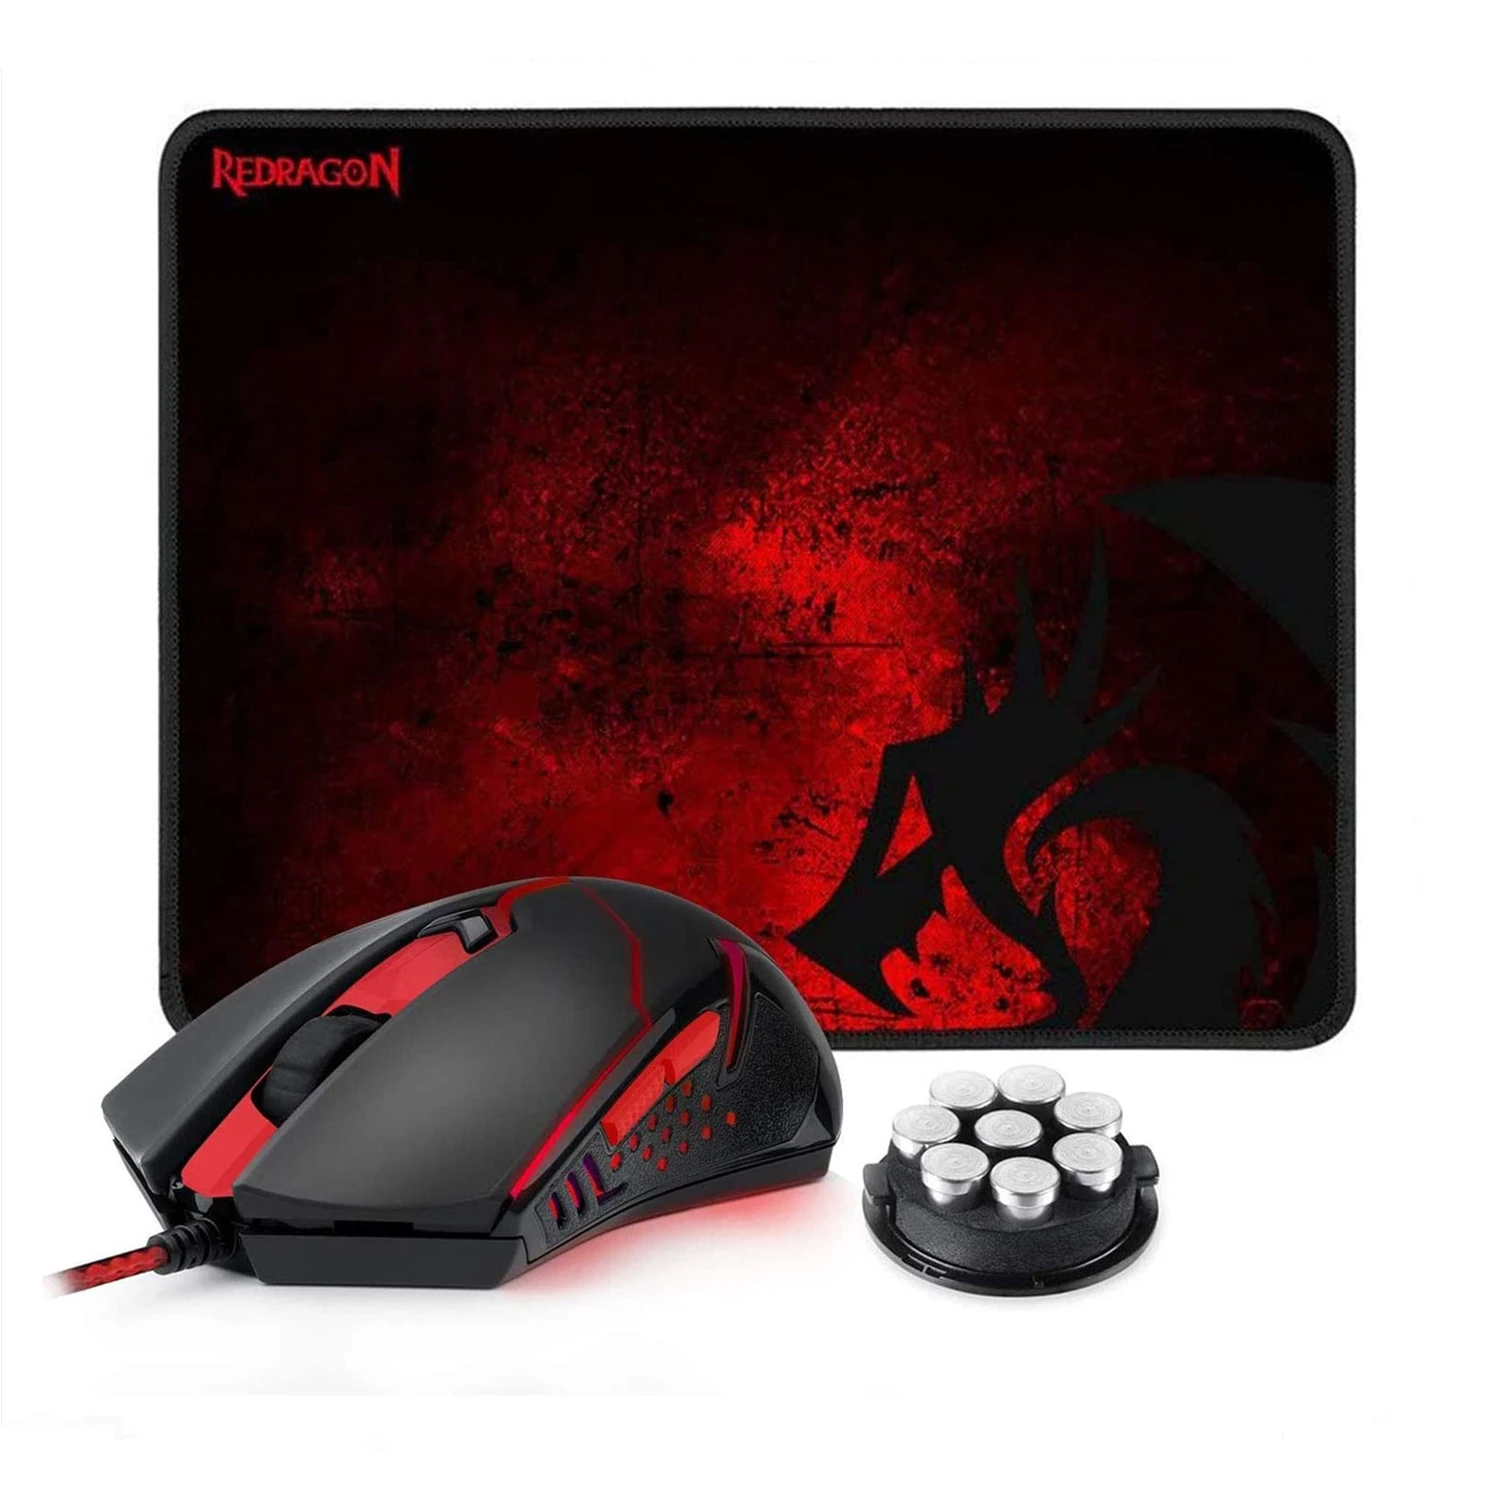 

Redragon M601-BA Gaming Mouse and Mouse Pad Combo Wired MMO 6 Button Mouse 3200 DPI Red LED Backlit for Windows PC Gamer